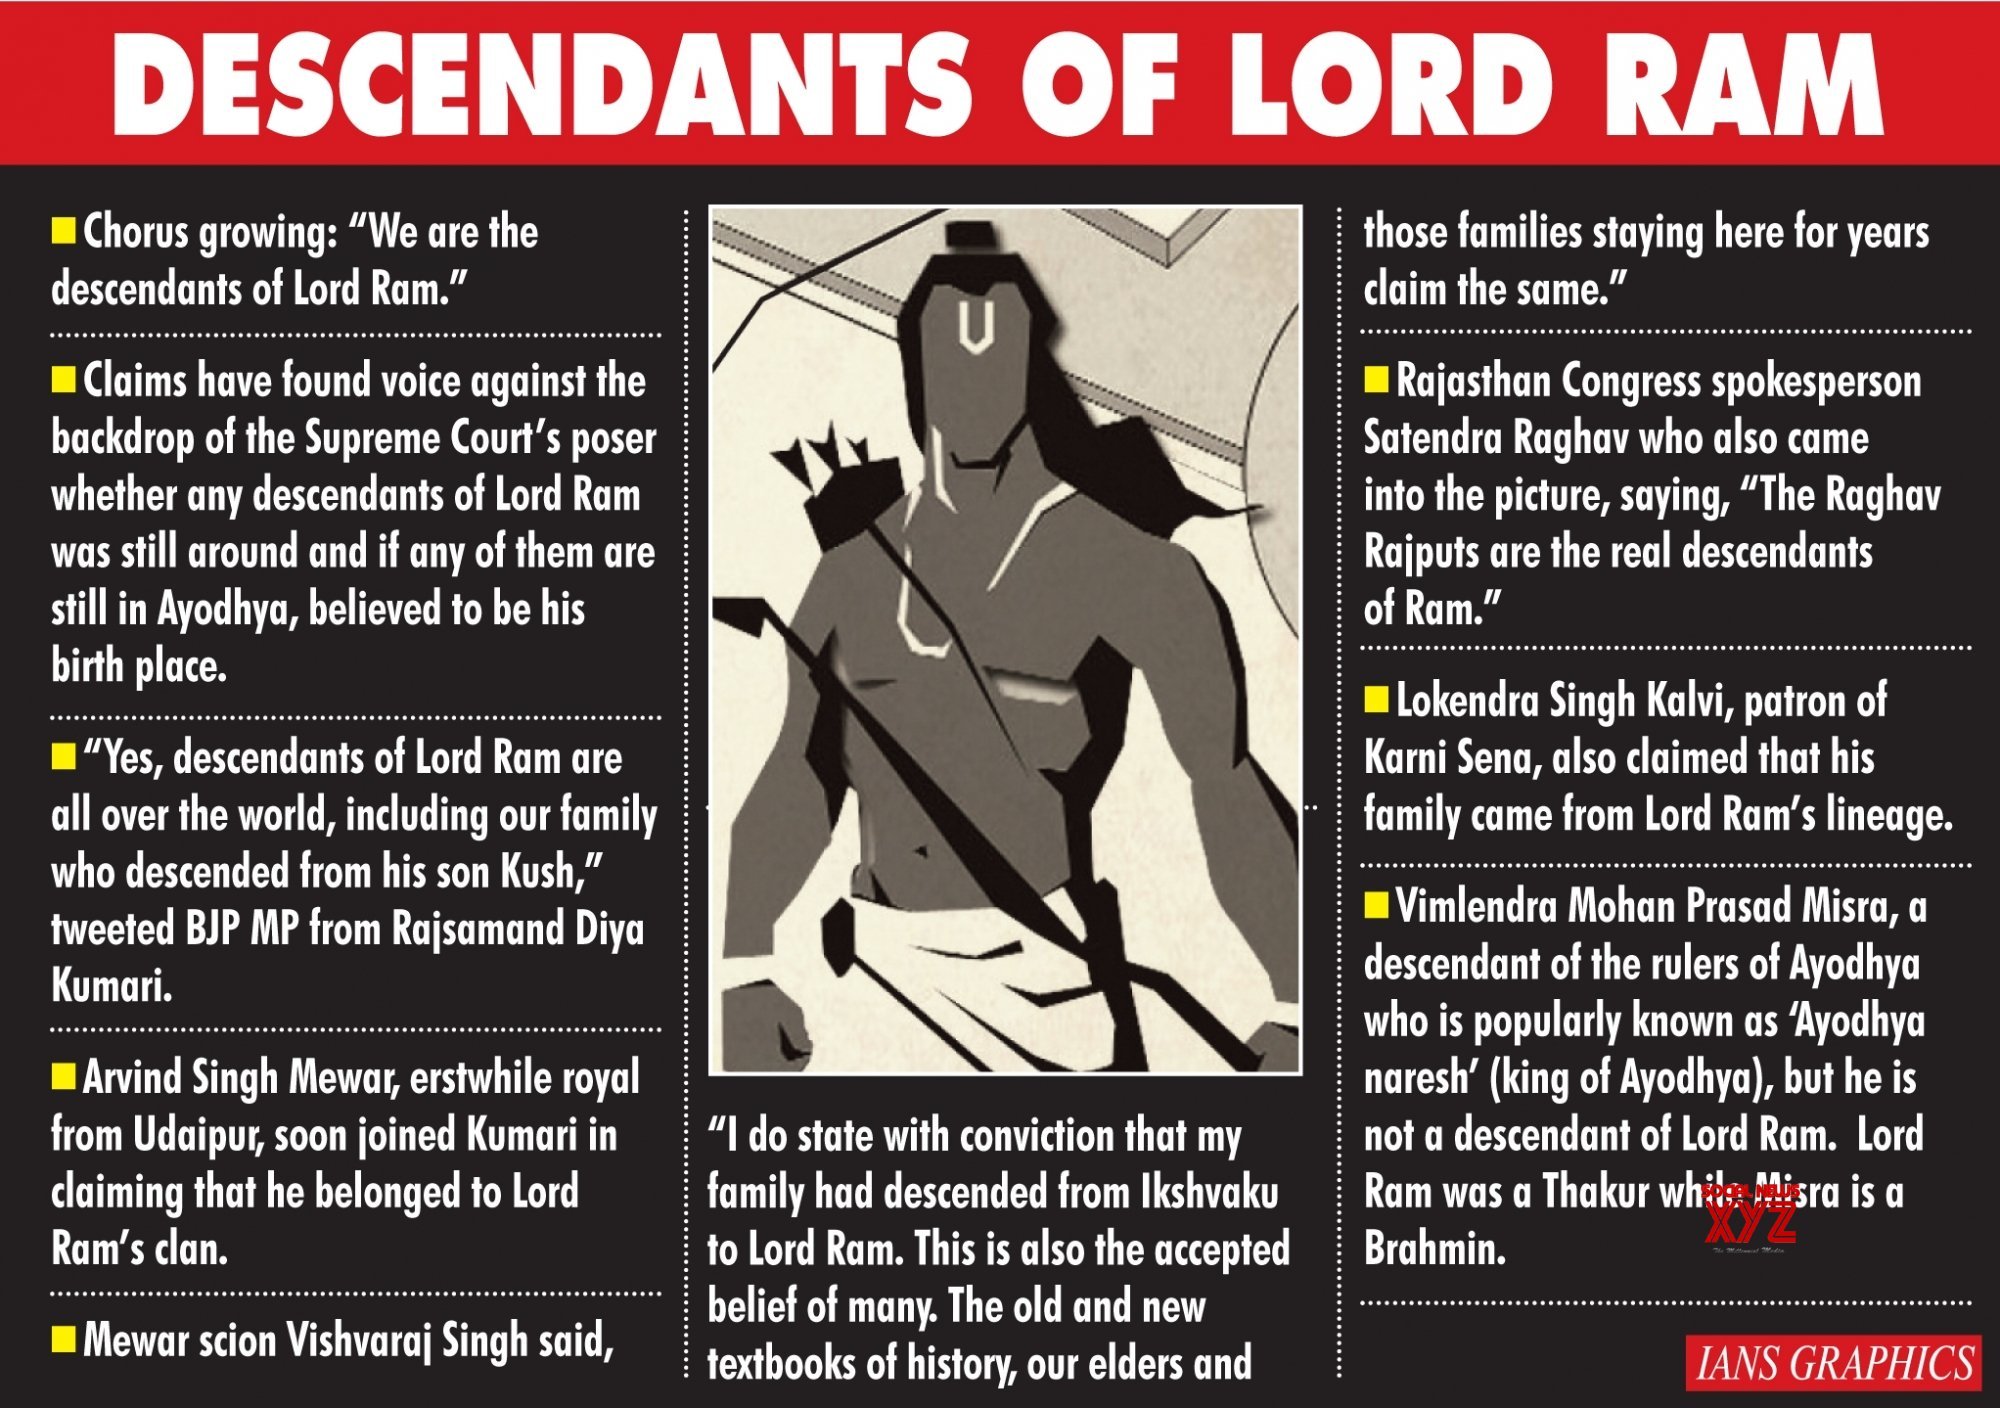 Race on to claim legacy of Lord Ram